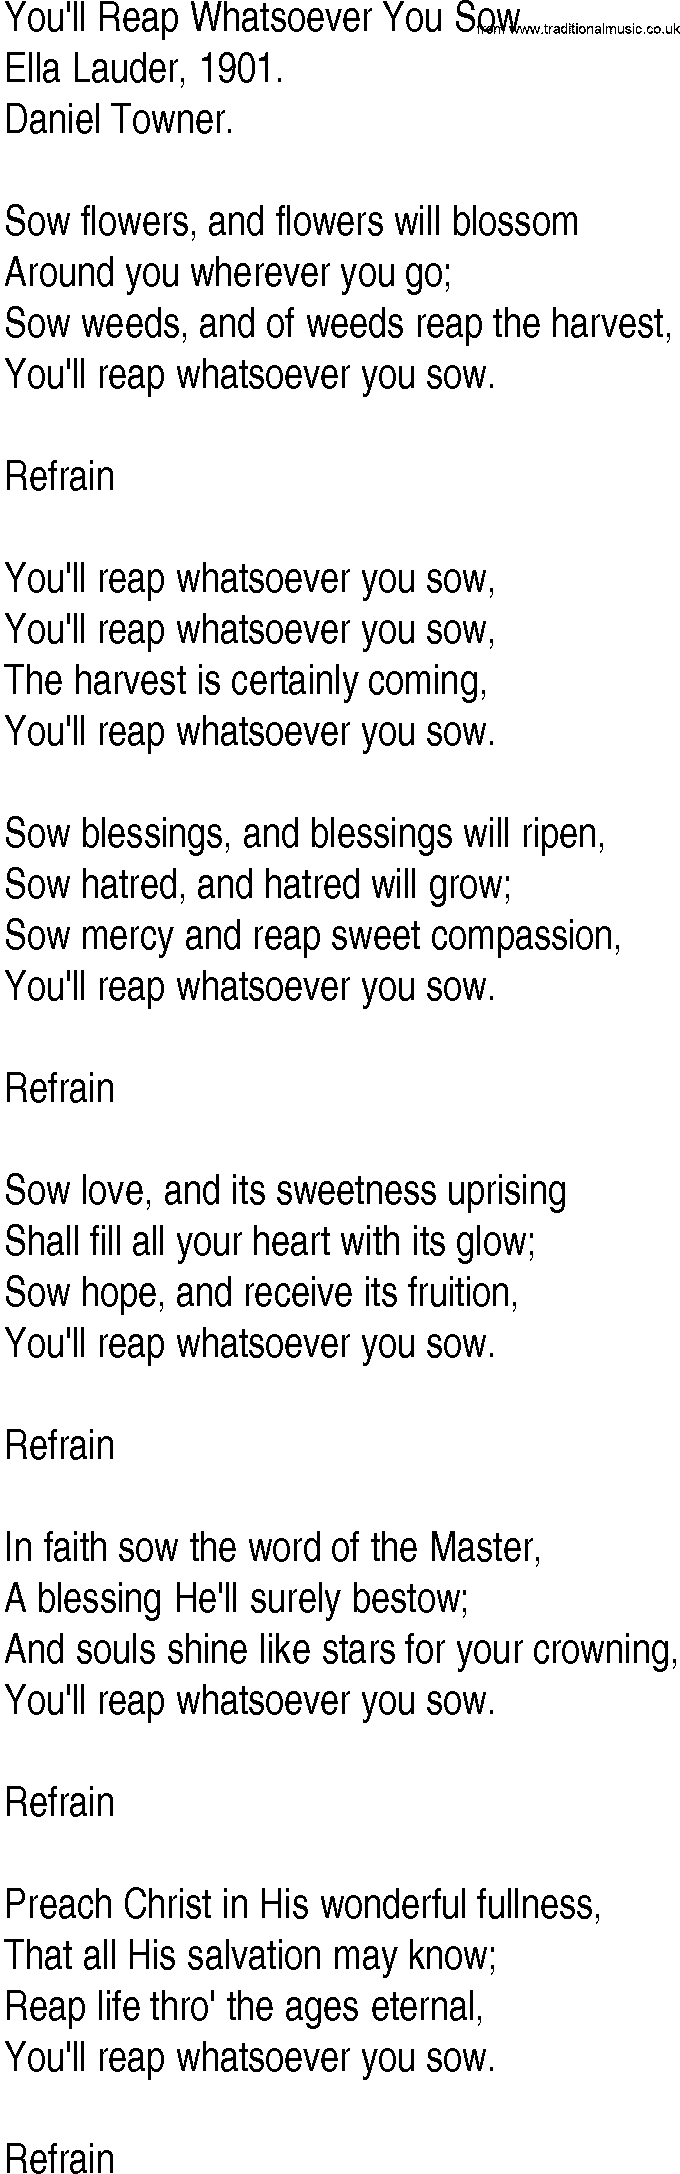 Hymn and Gospel Song: You'll Reap Whatsoever You Sow by Ella Lauder lyrics